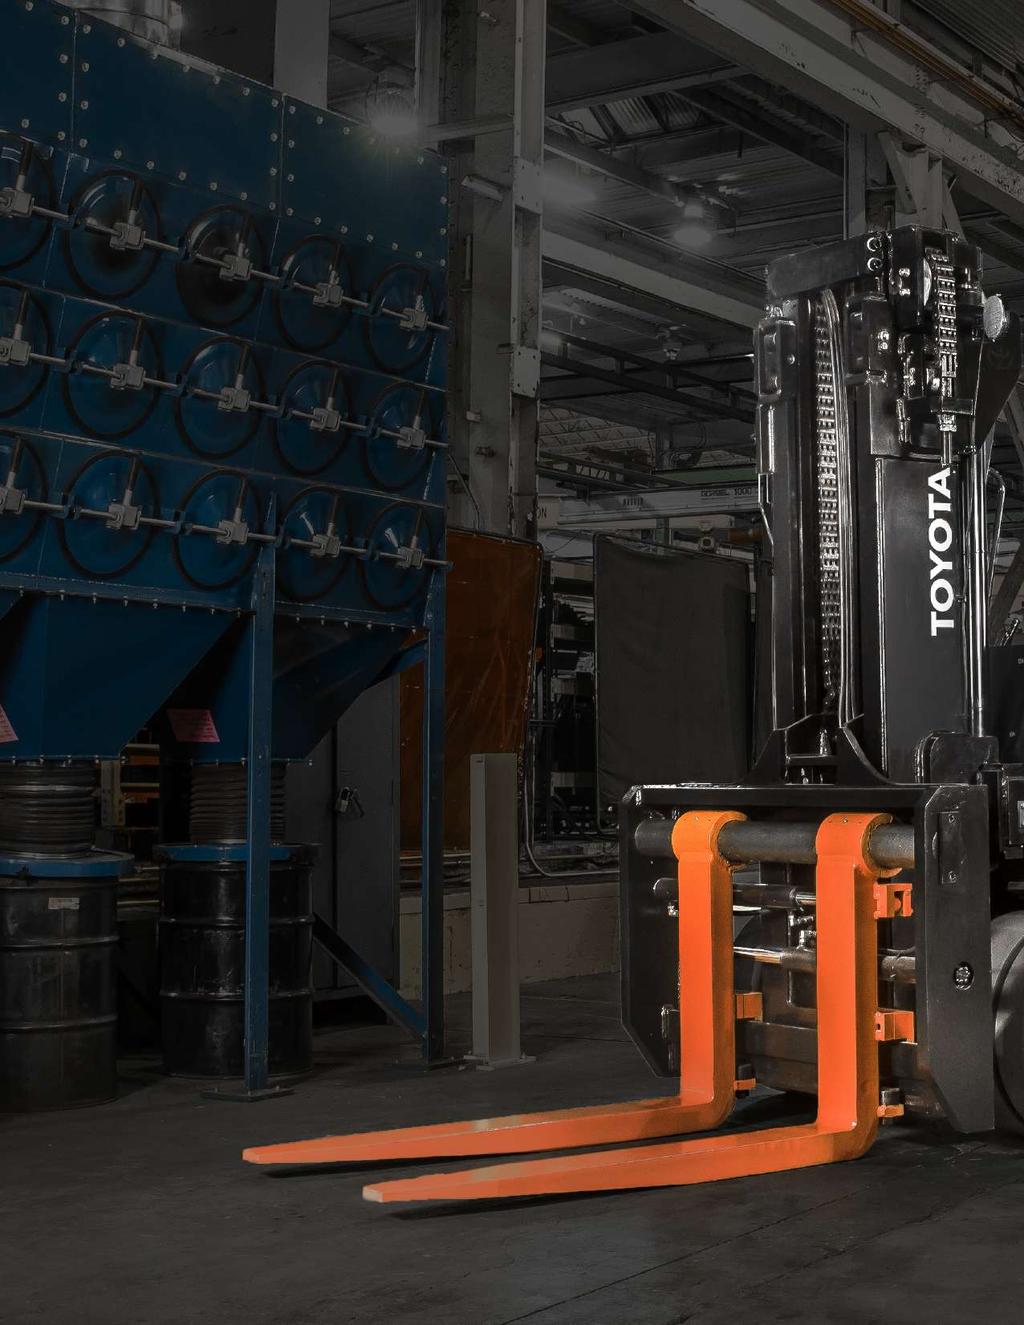 KING-SIZED POWER Prepare to have your expectations blown away. Power, durability, and all the high standards of the Toyota Heavy Duty line of forklifts.